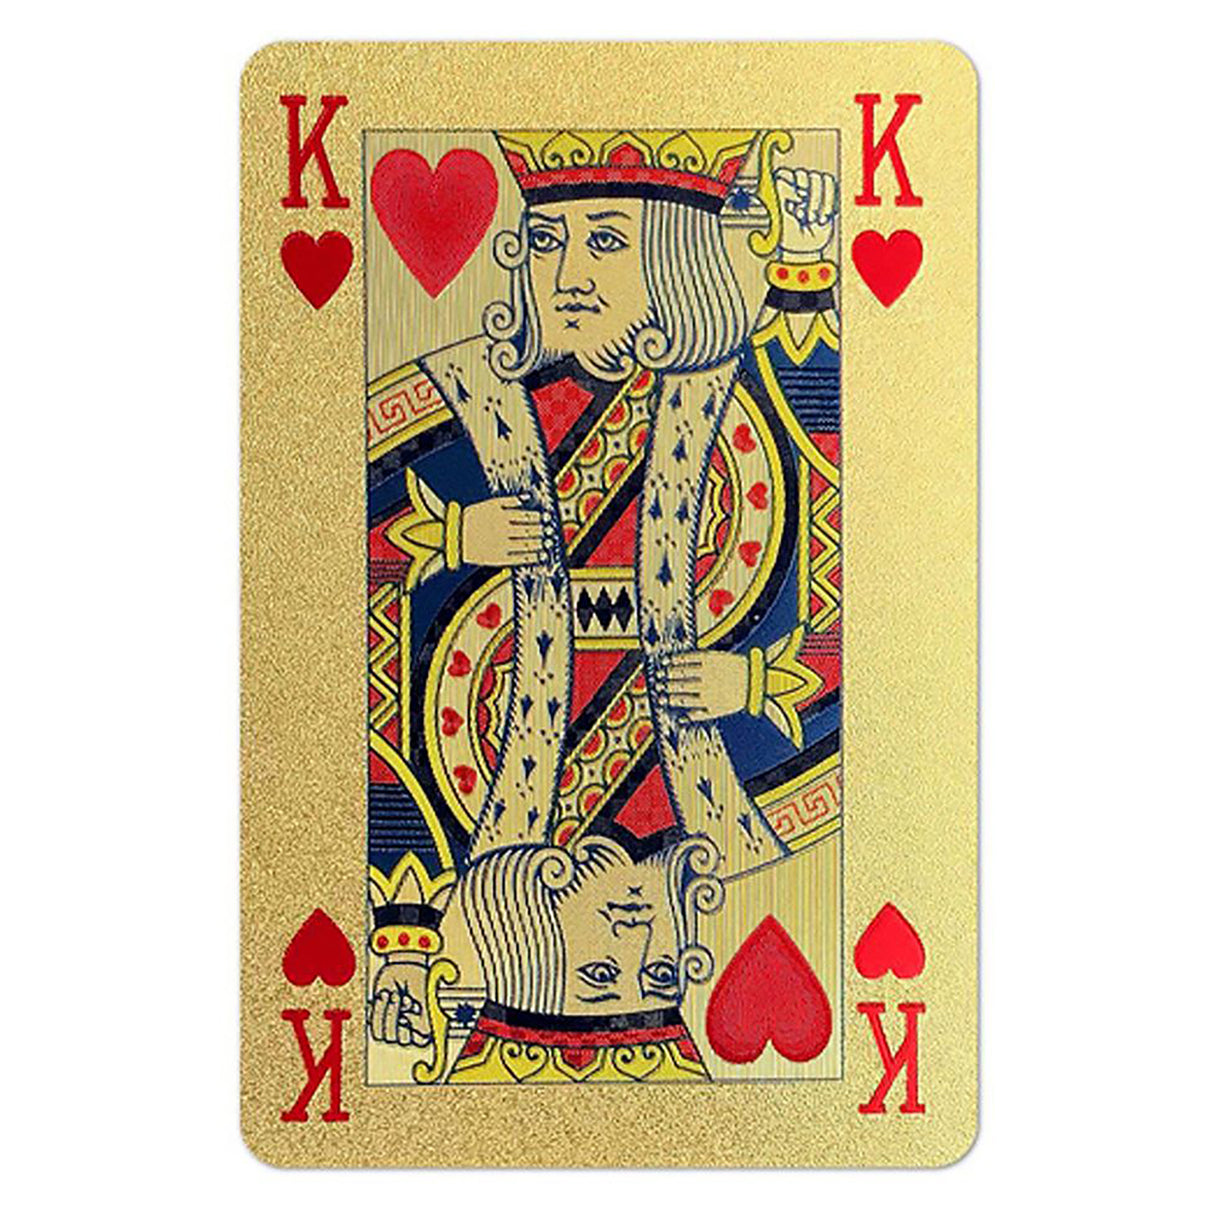 Waddingtons No 1 Gold Edition Playing Cards